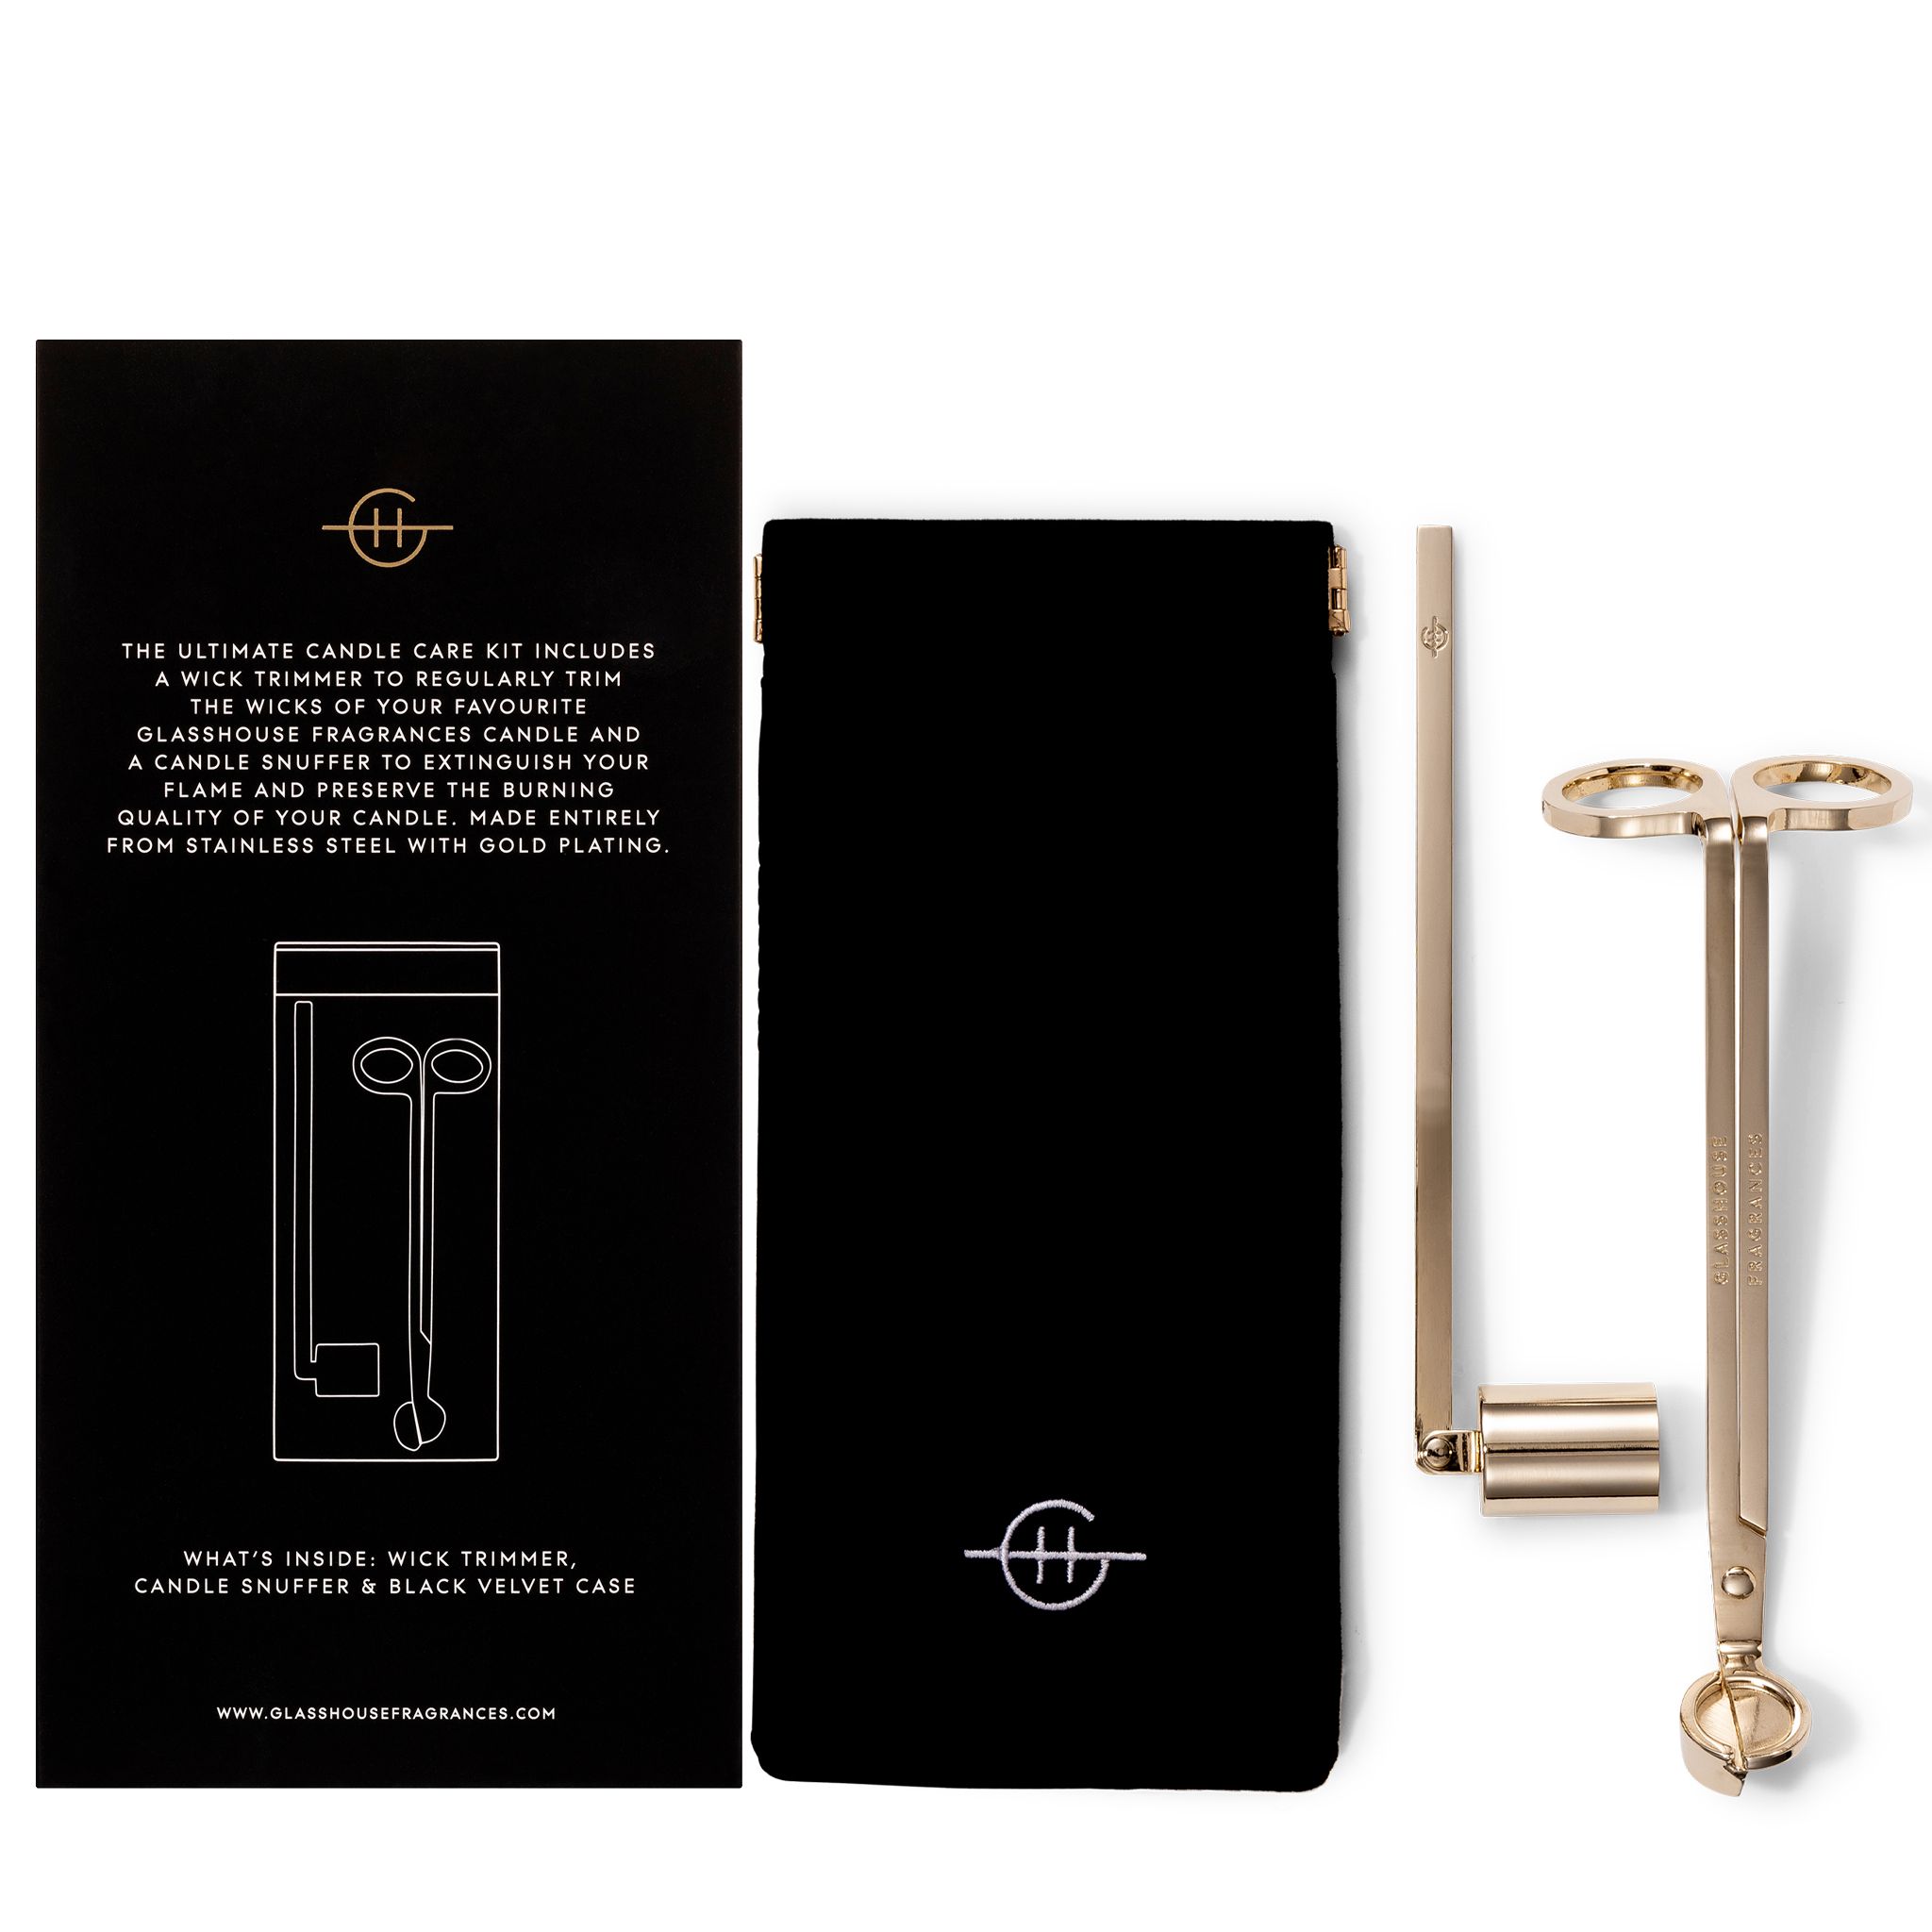 Glasshouse Fragrances Candle Care Kit - wick trimmer, candle snuffer, velvet case and gift box - back of product shot